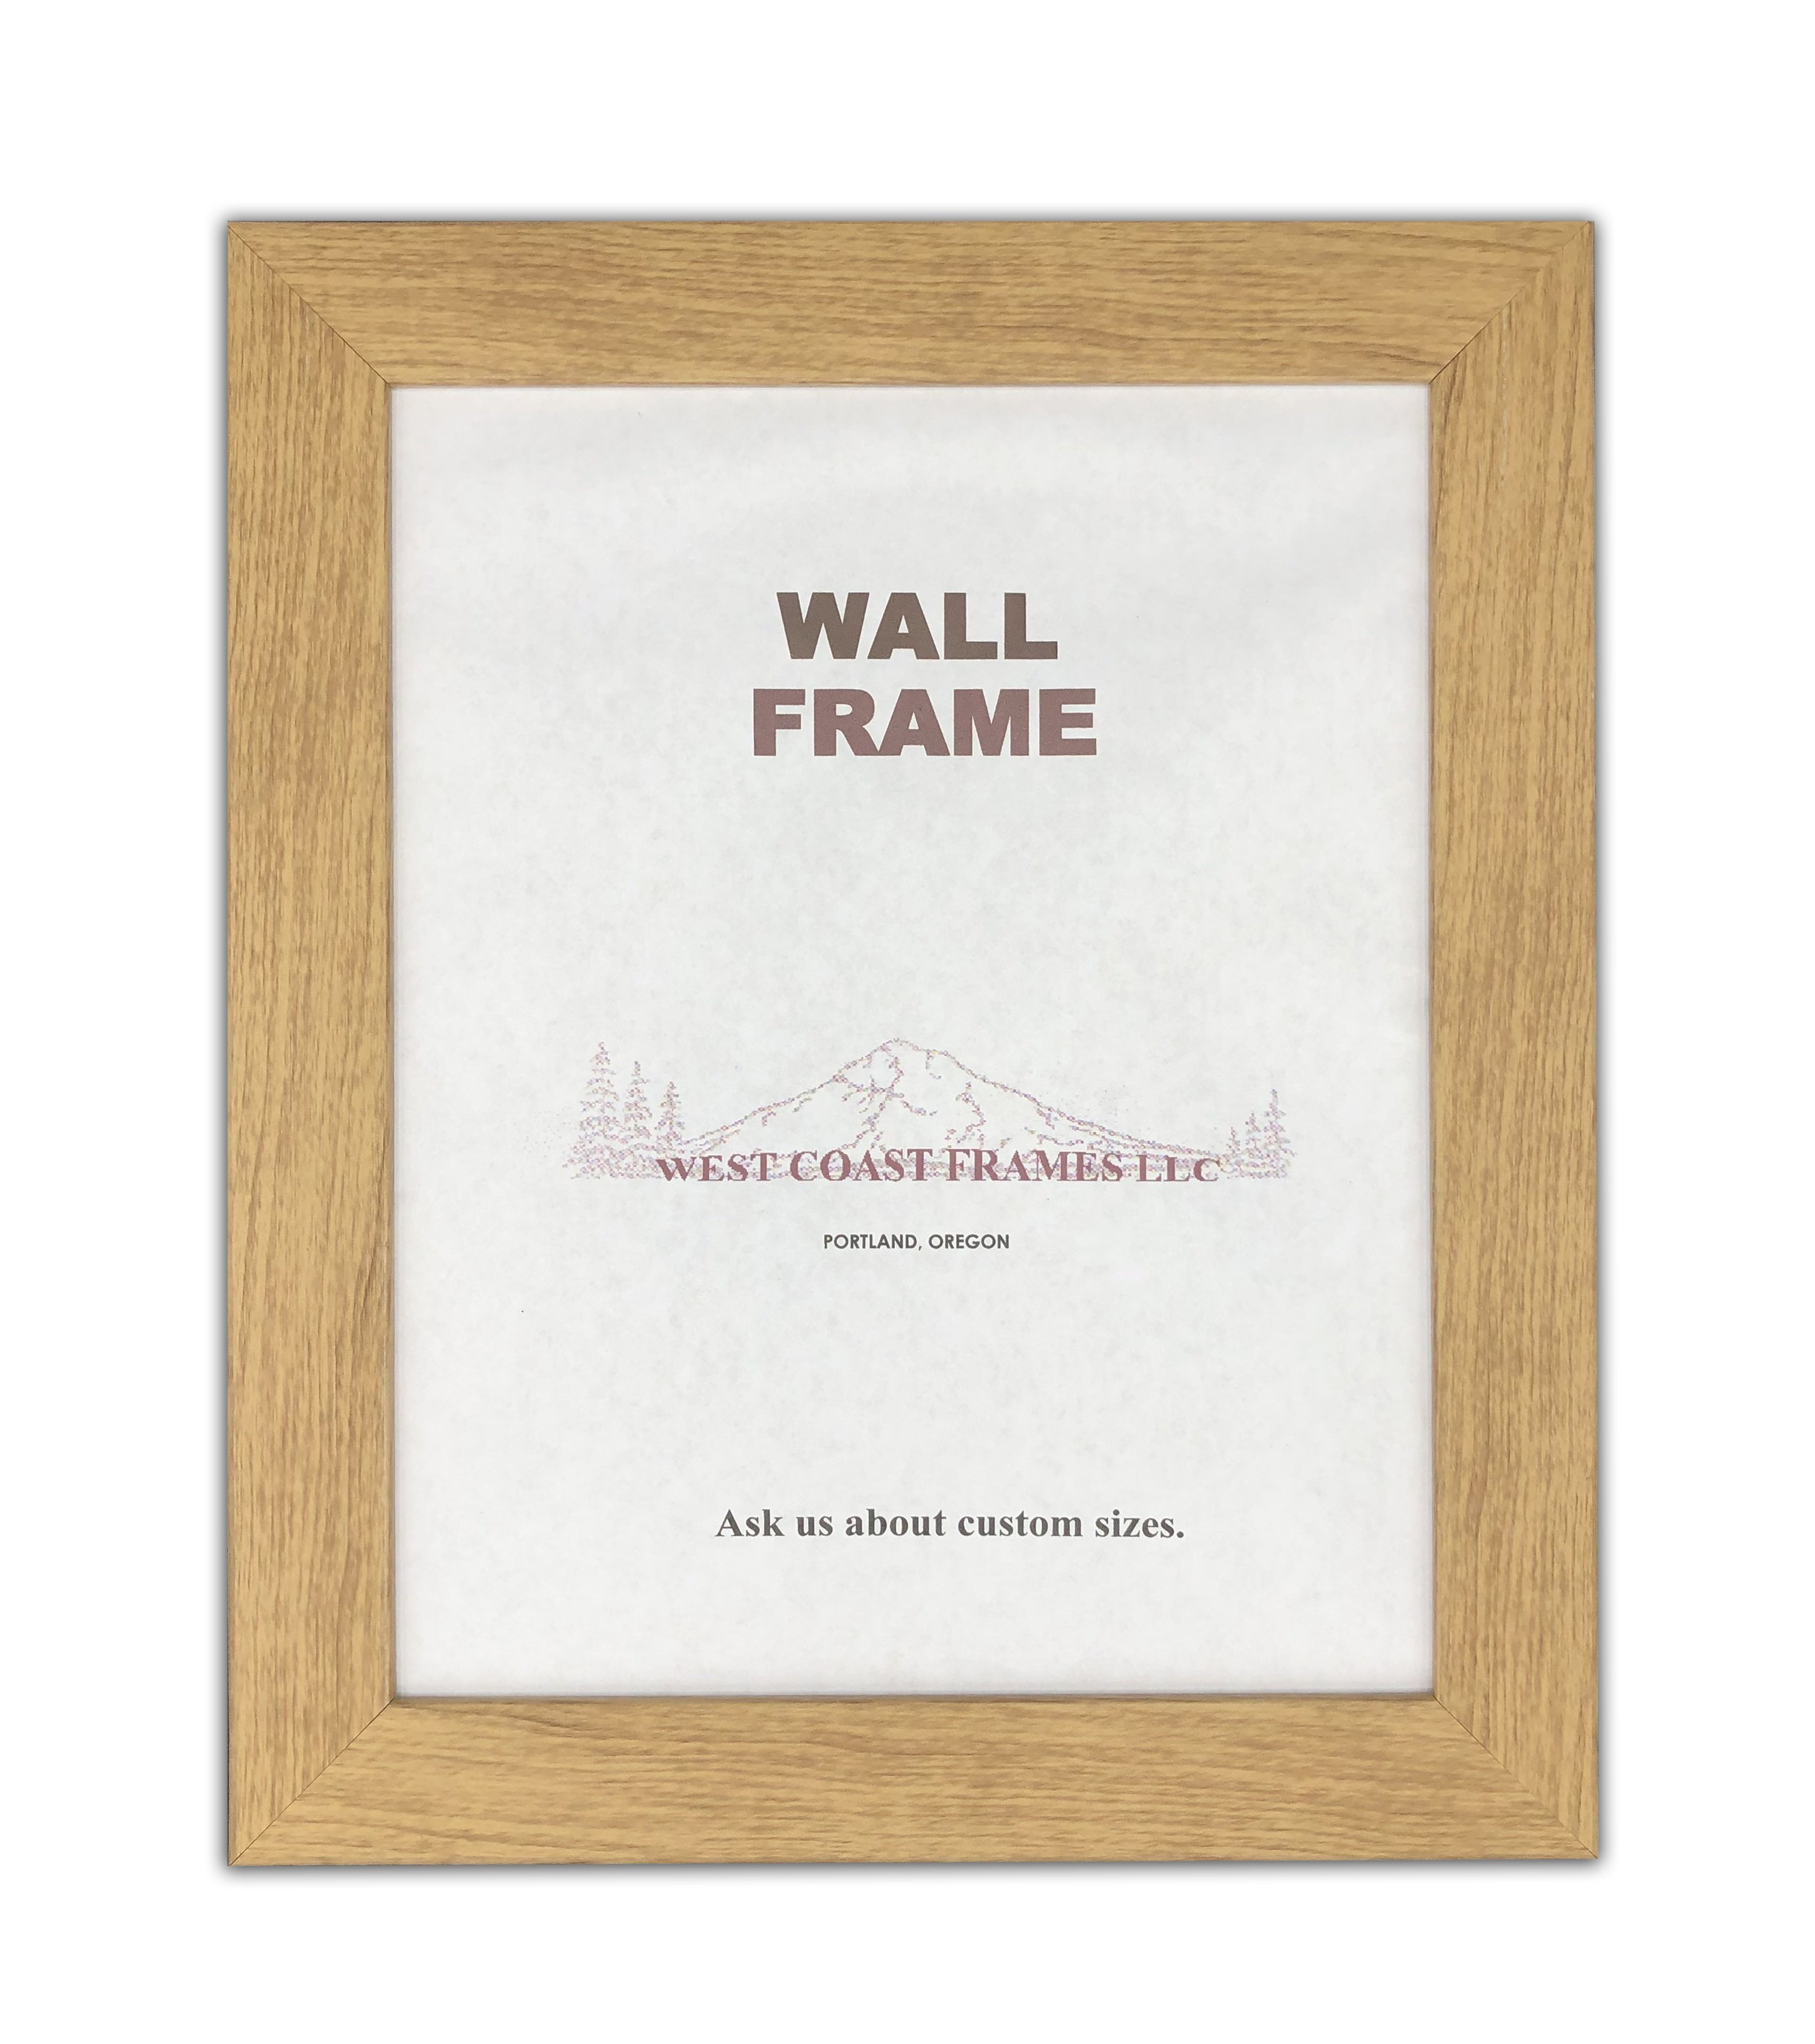 Frame Smart pack of 4 White picture/photo mounts size 8x6 for 6x4 inches 